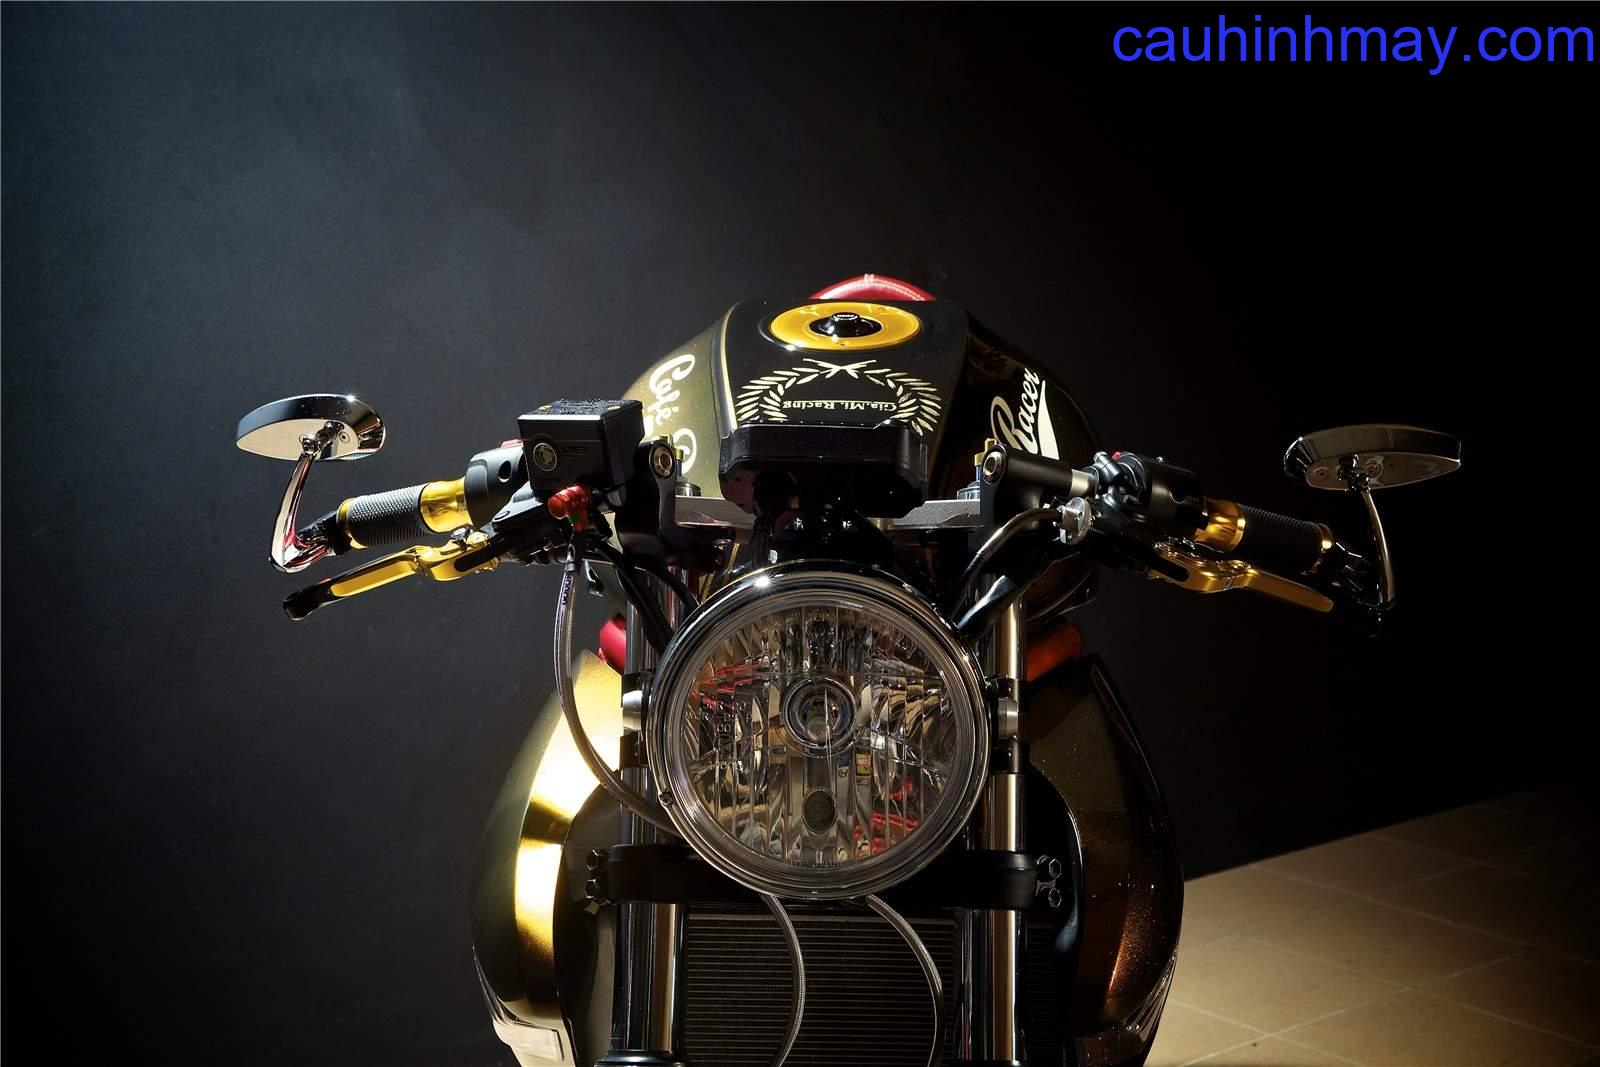 KAWASAKI ER6-N CAFE RACER BY BY GIA MI RACING - cauhinhmay.com